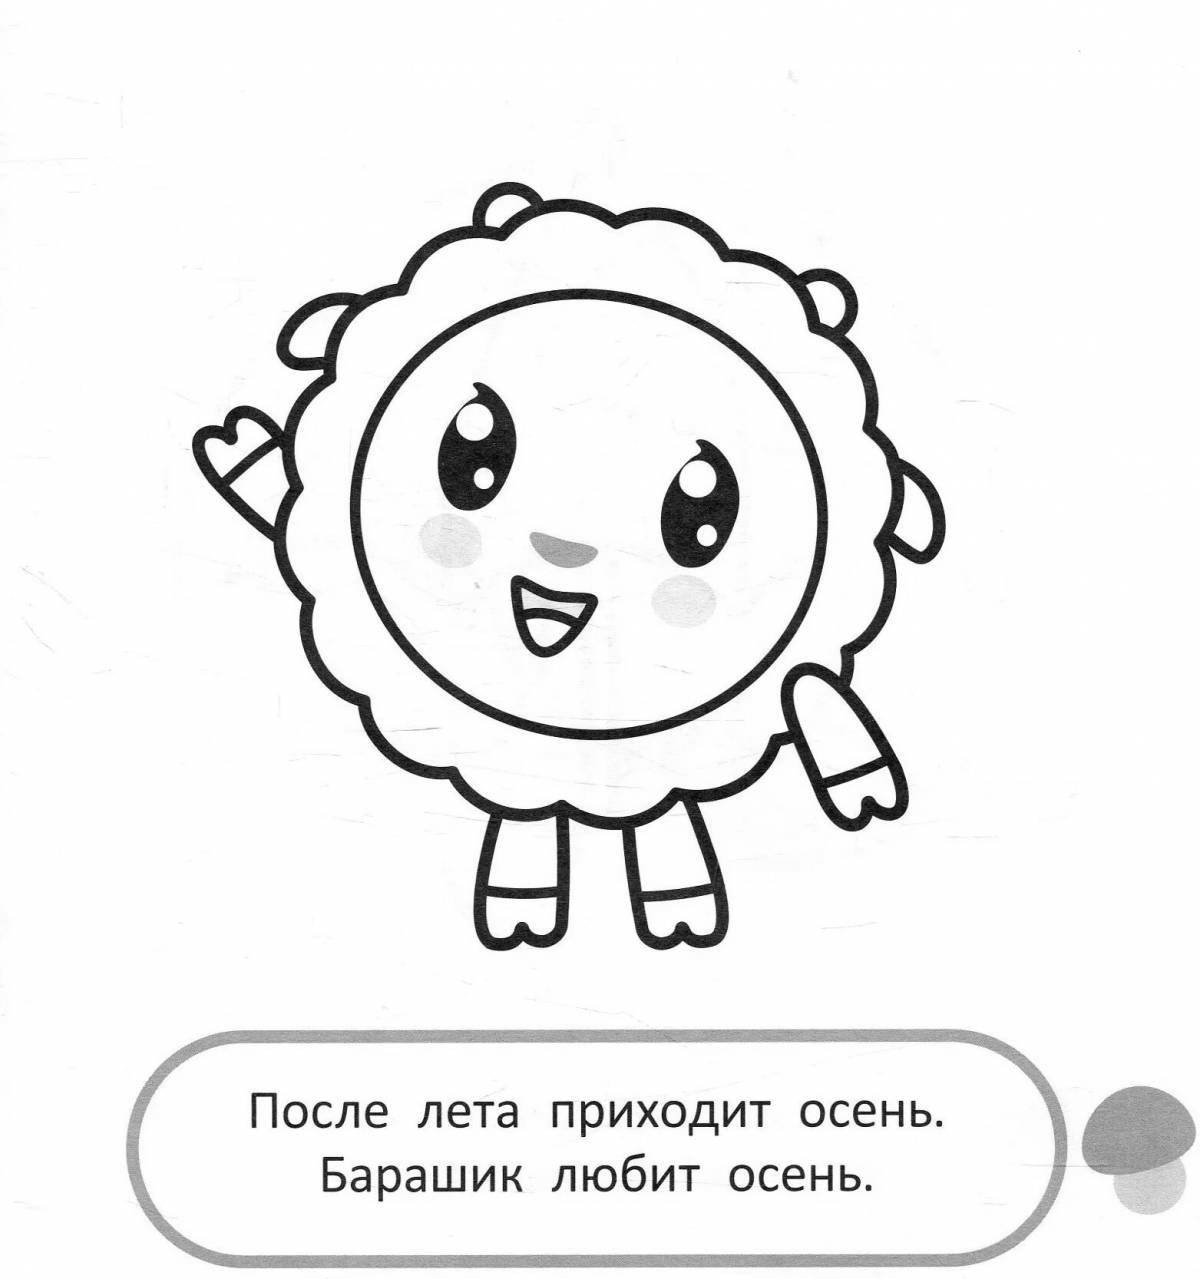 Adorable cartoon coloring book for kids